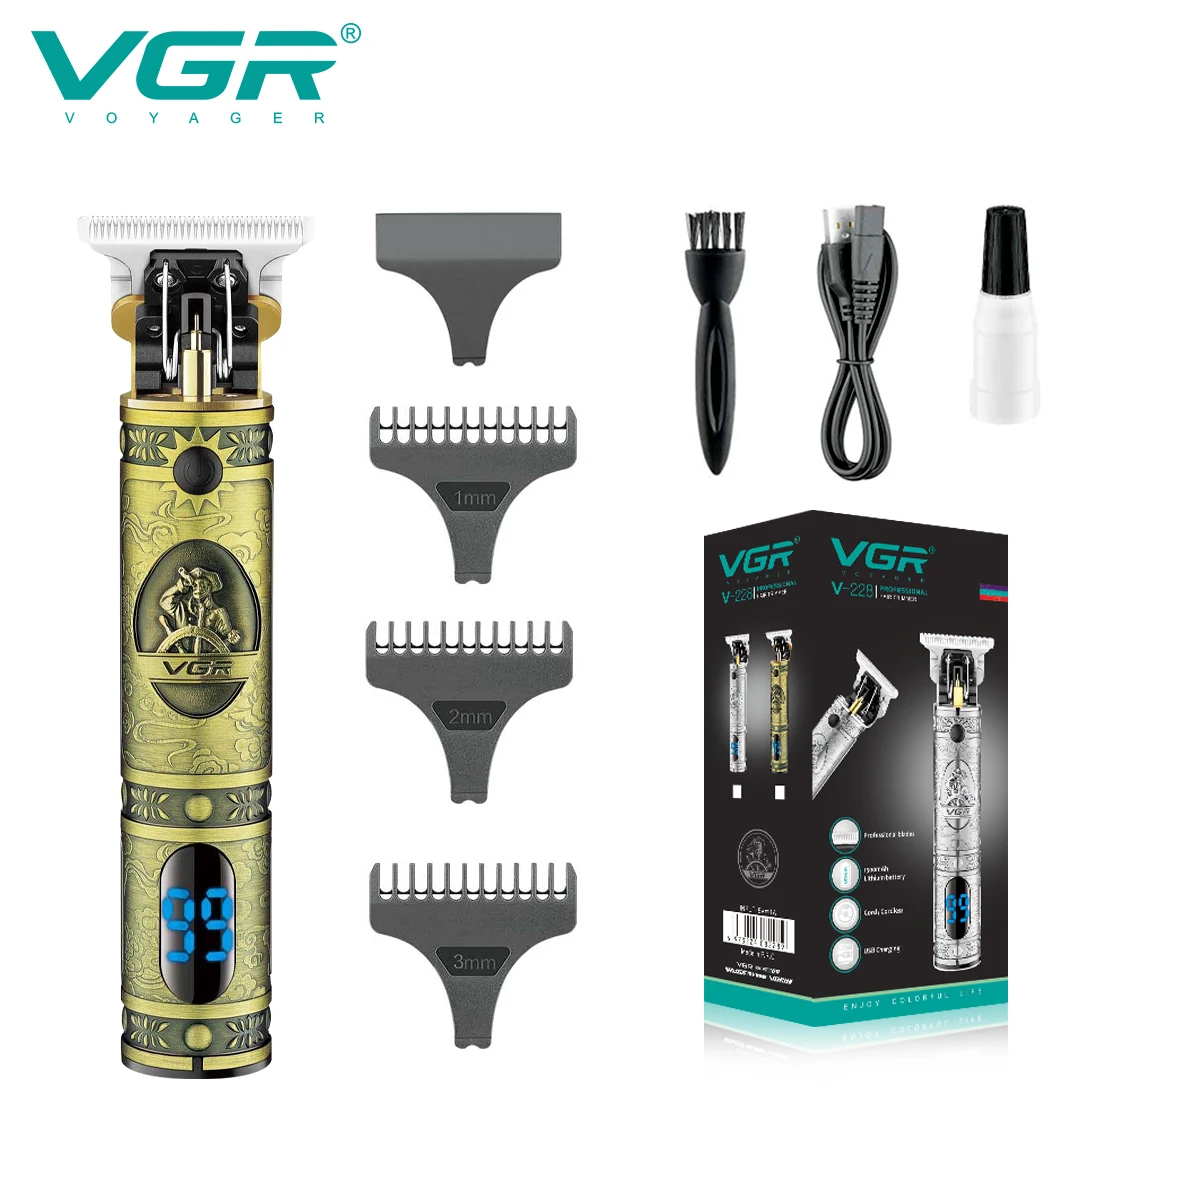 VGR T9 Hair Clipper Metal Hair Cutting Machine Professional Barber Cordless Electric Trimmer Rechargeable Trimmer for Men V-228